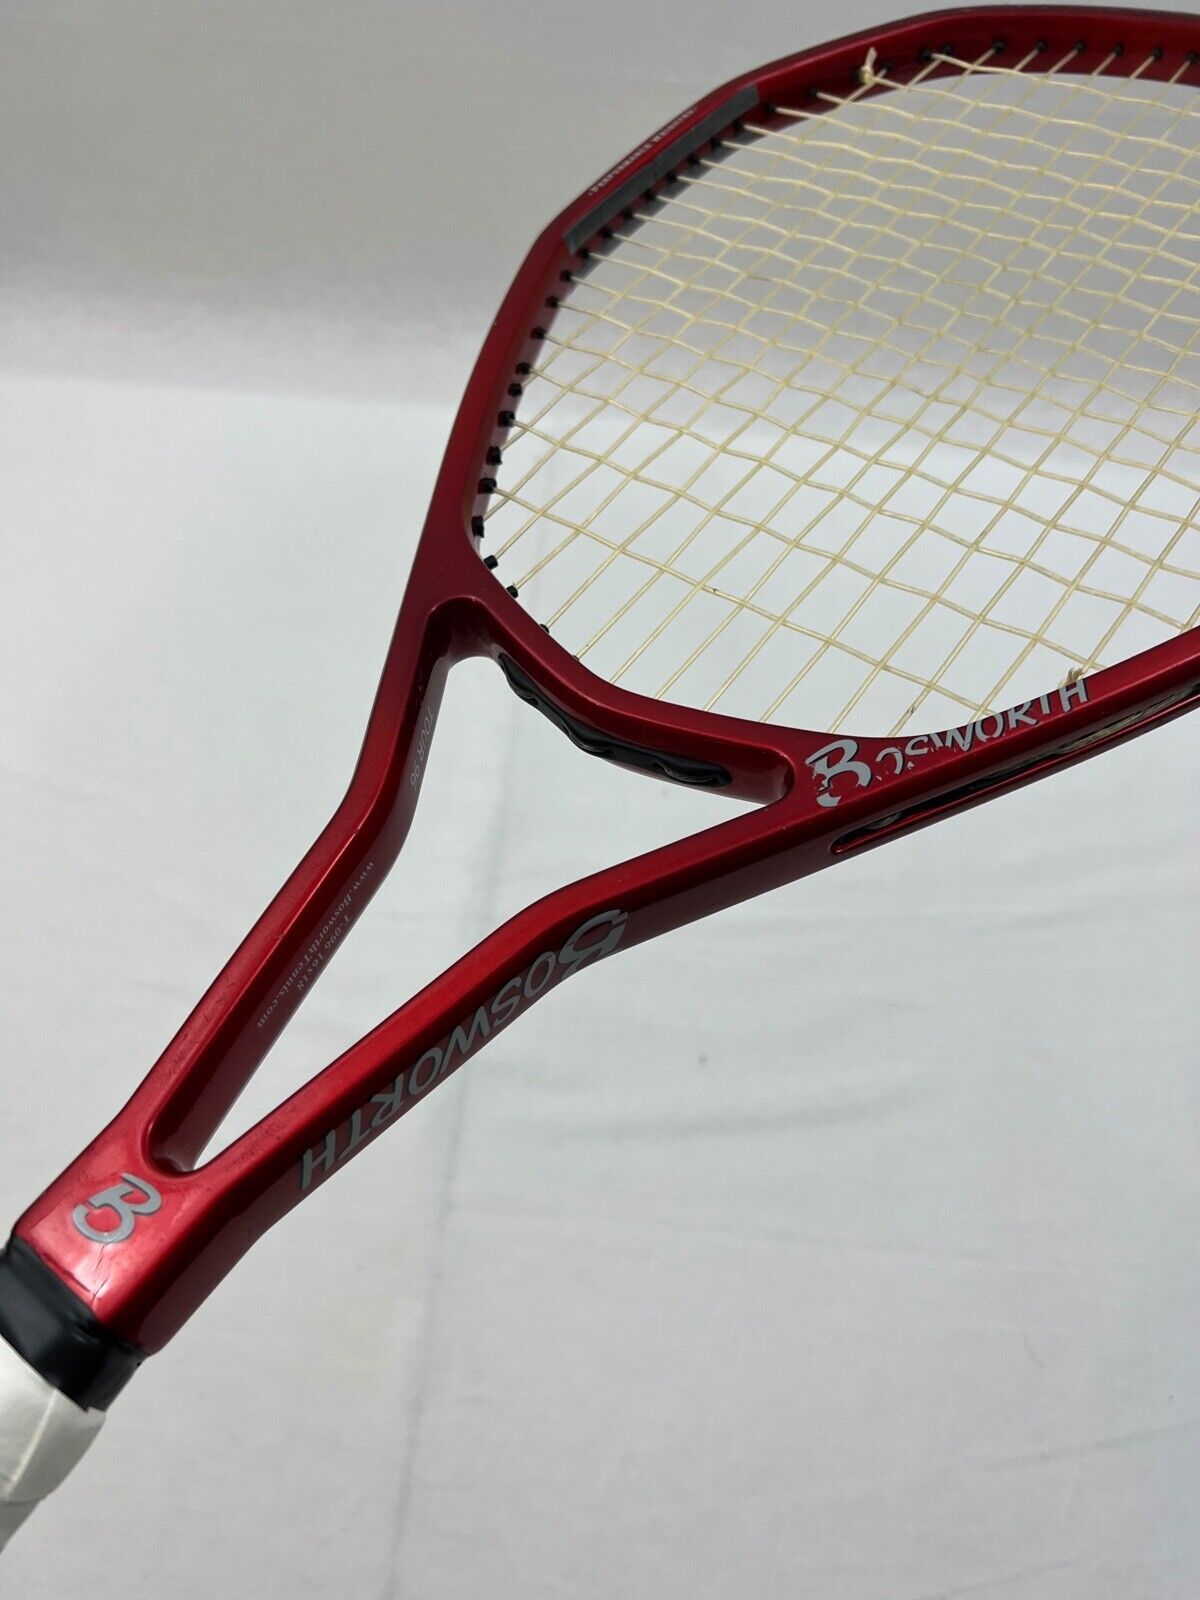 Picture Of A Bosworth Tour 96 Racket